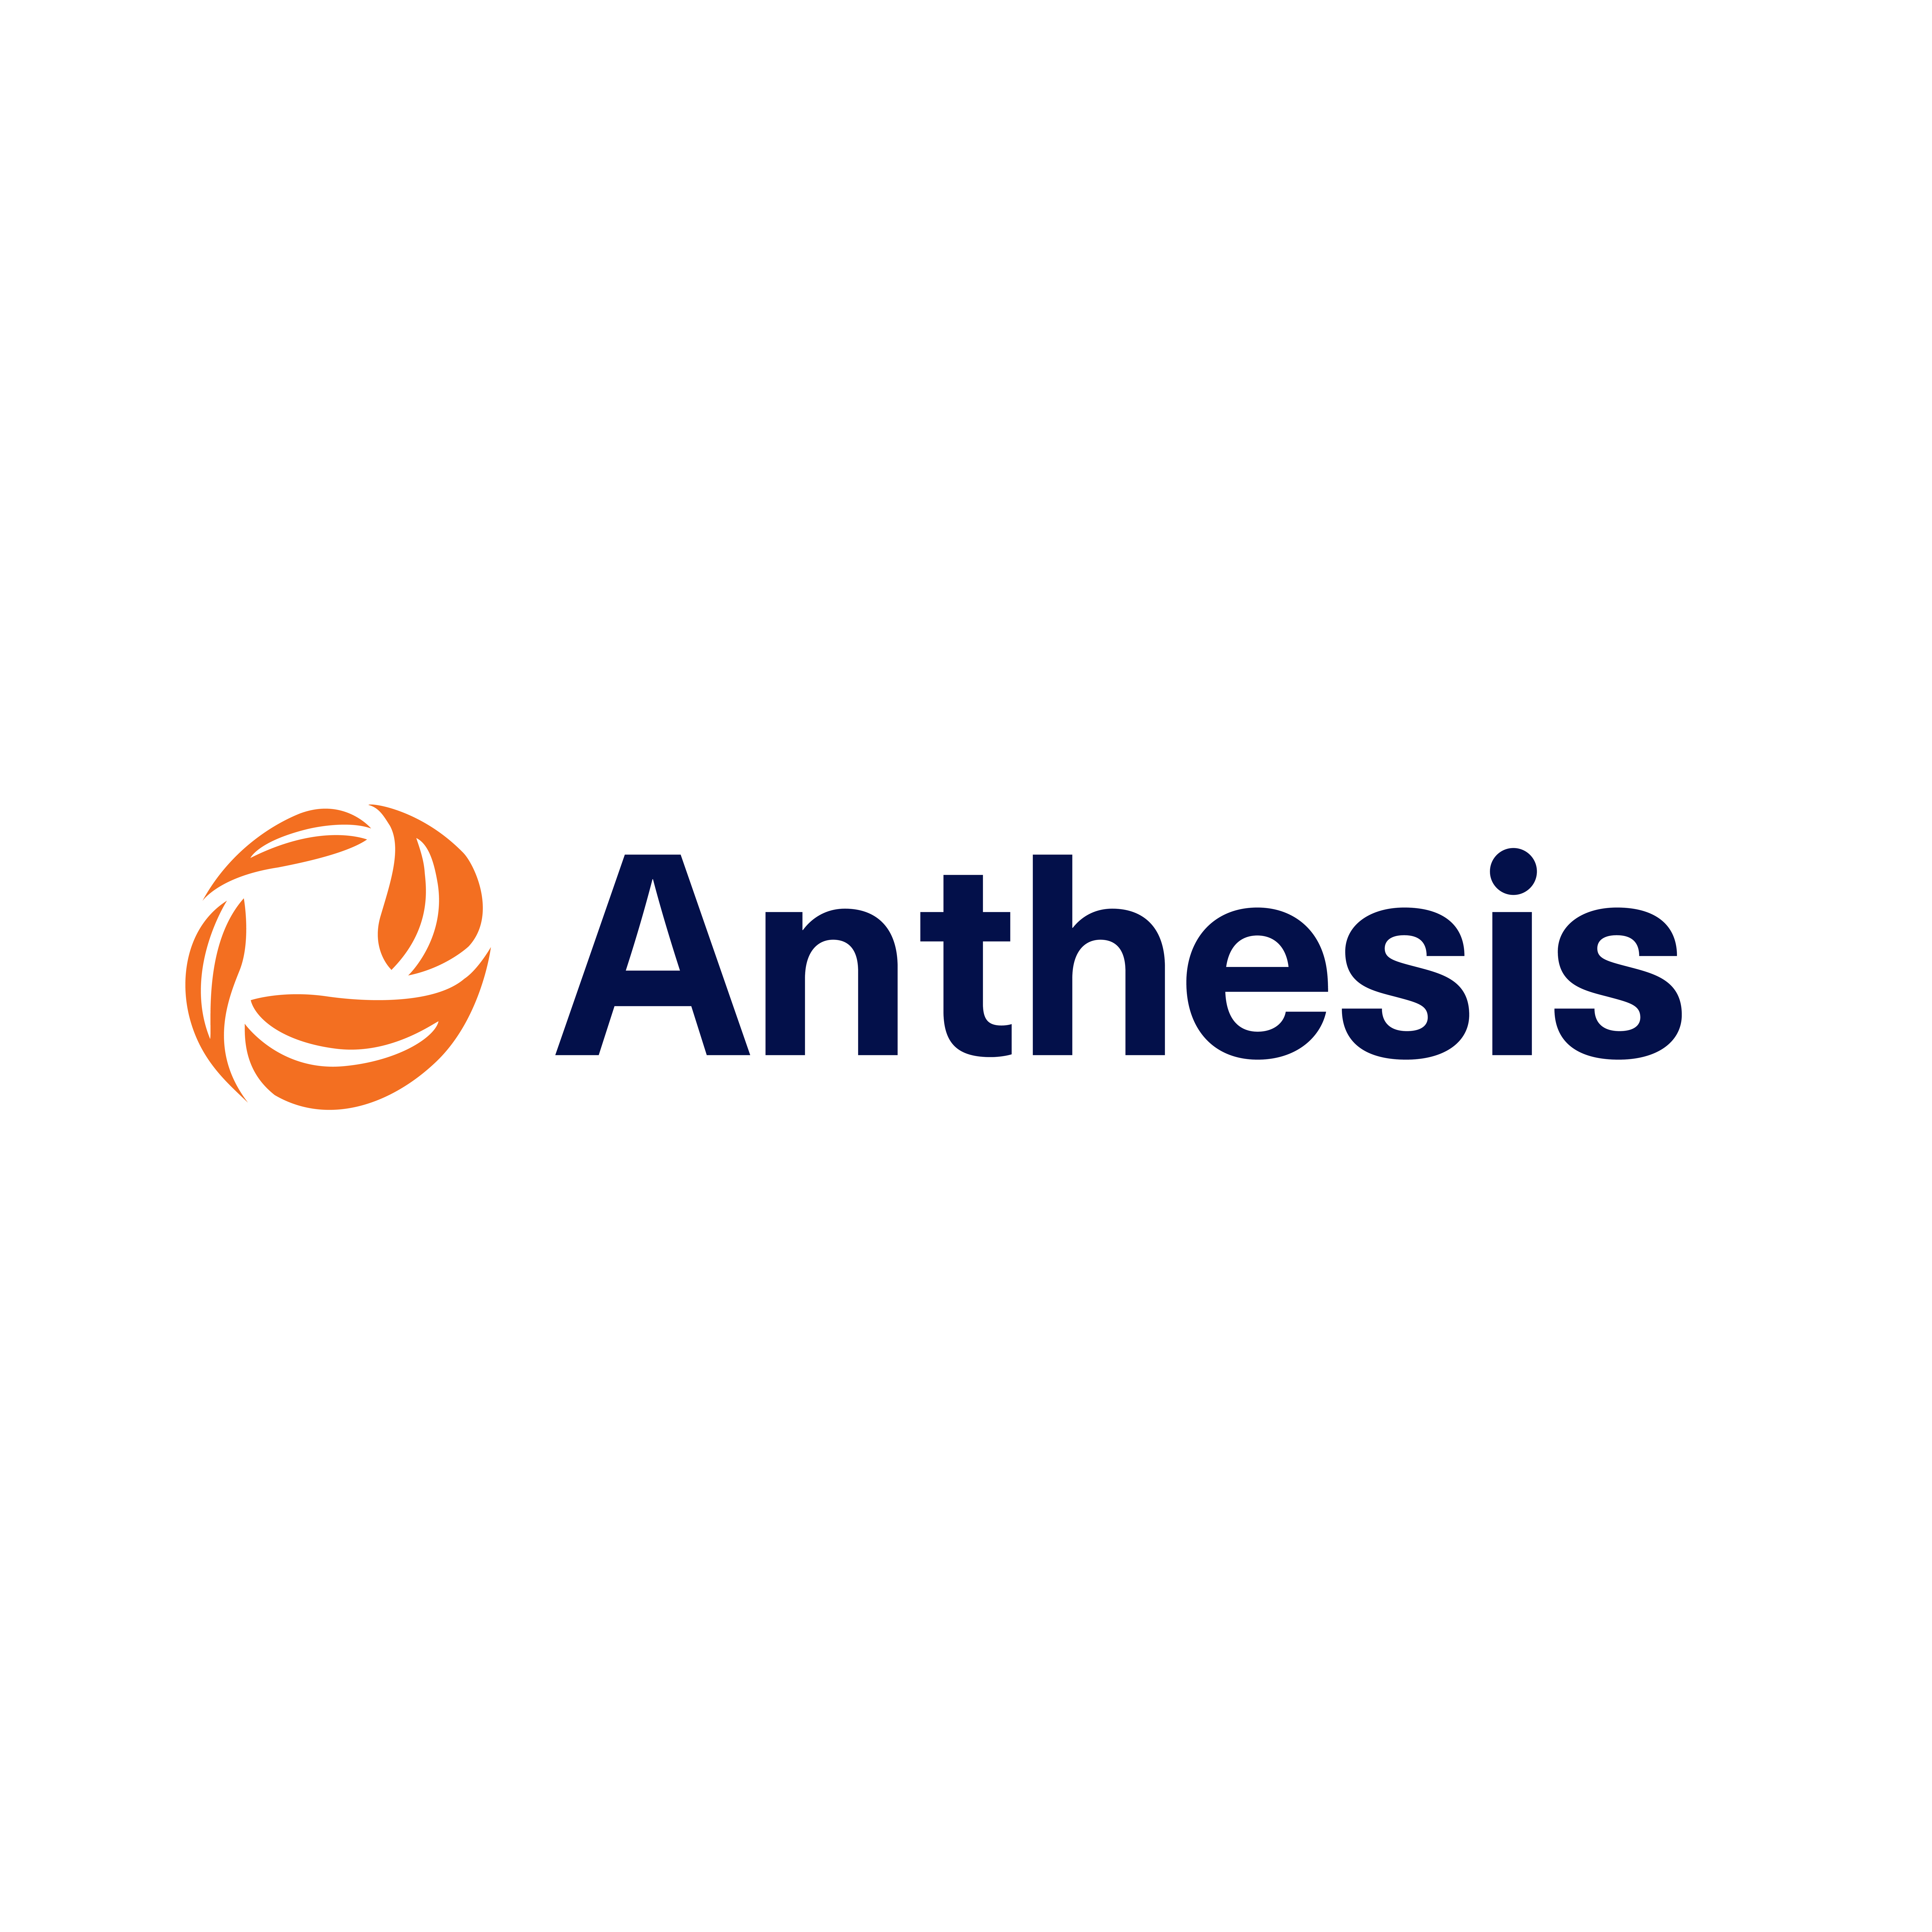 https://www.pro-manchester.co.uk/wp-content/uploads/2020/01/Anthesis-Main-Logo-Blue-Round.png